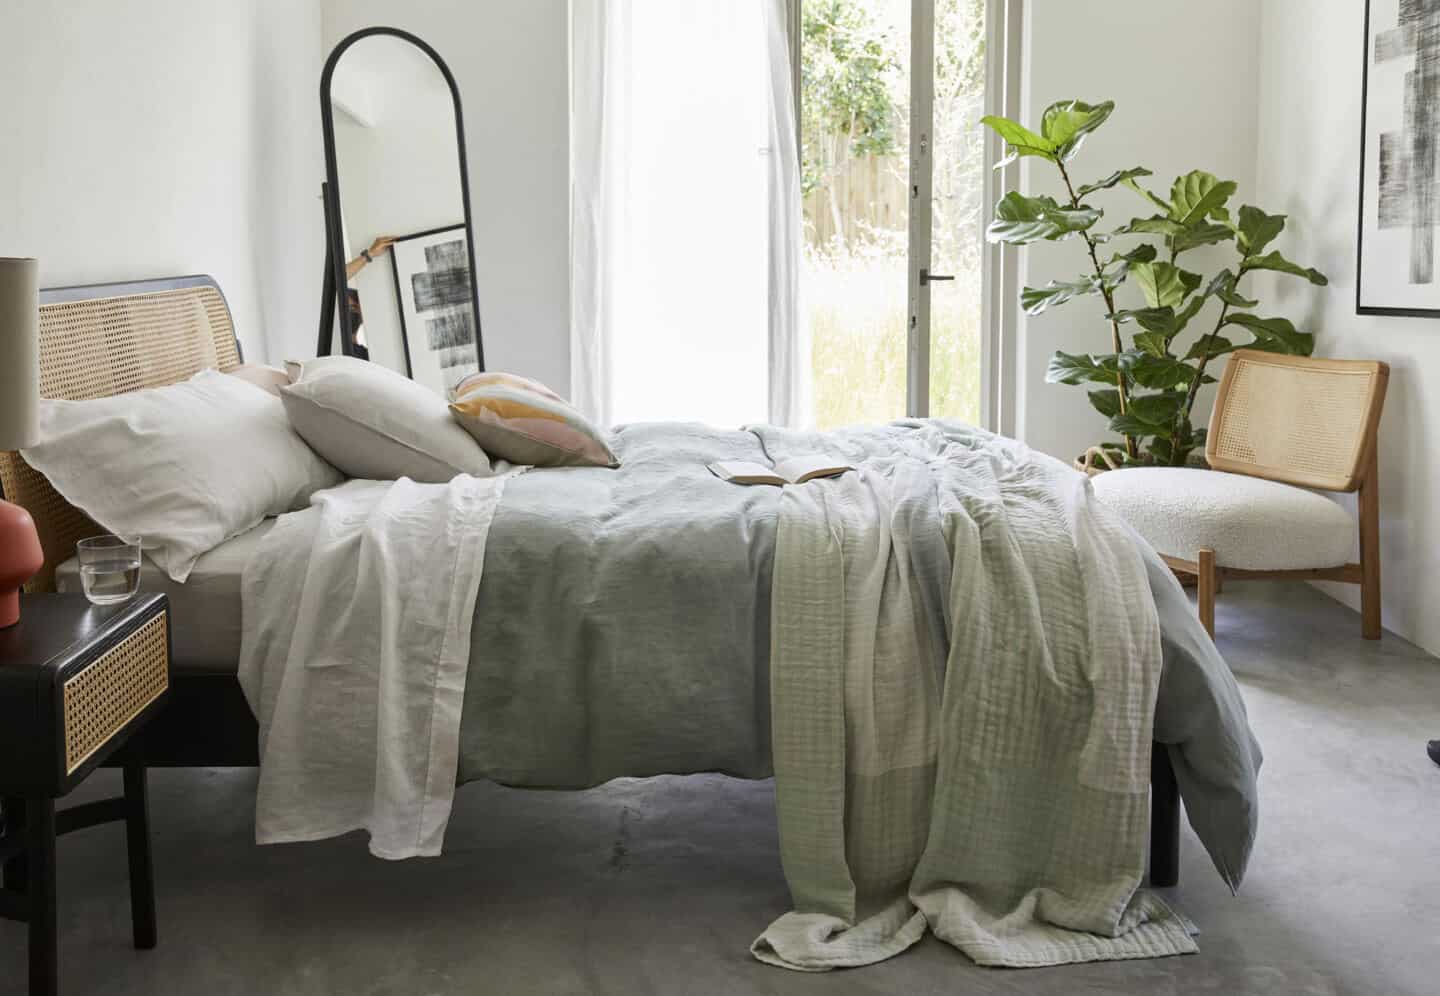 A Scandinavian style bedroom featuring natural materials and plants